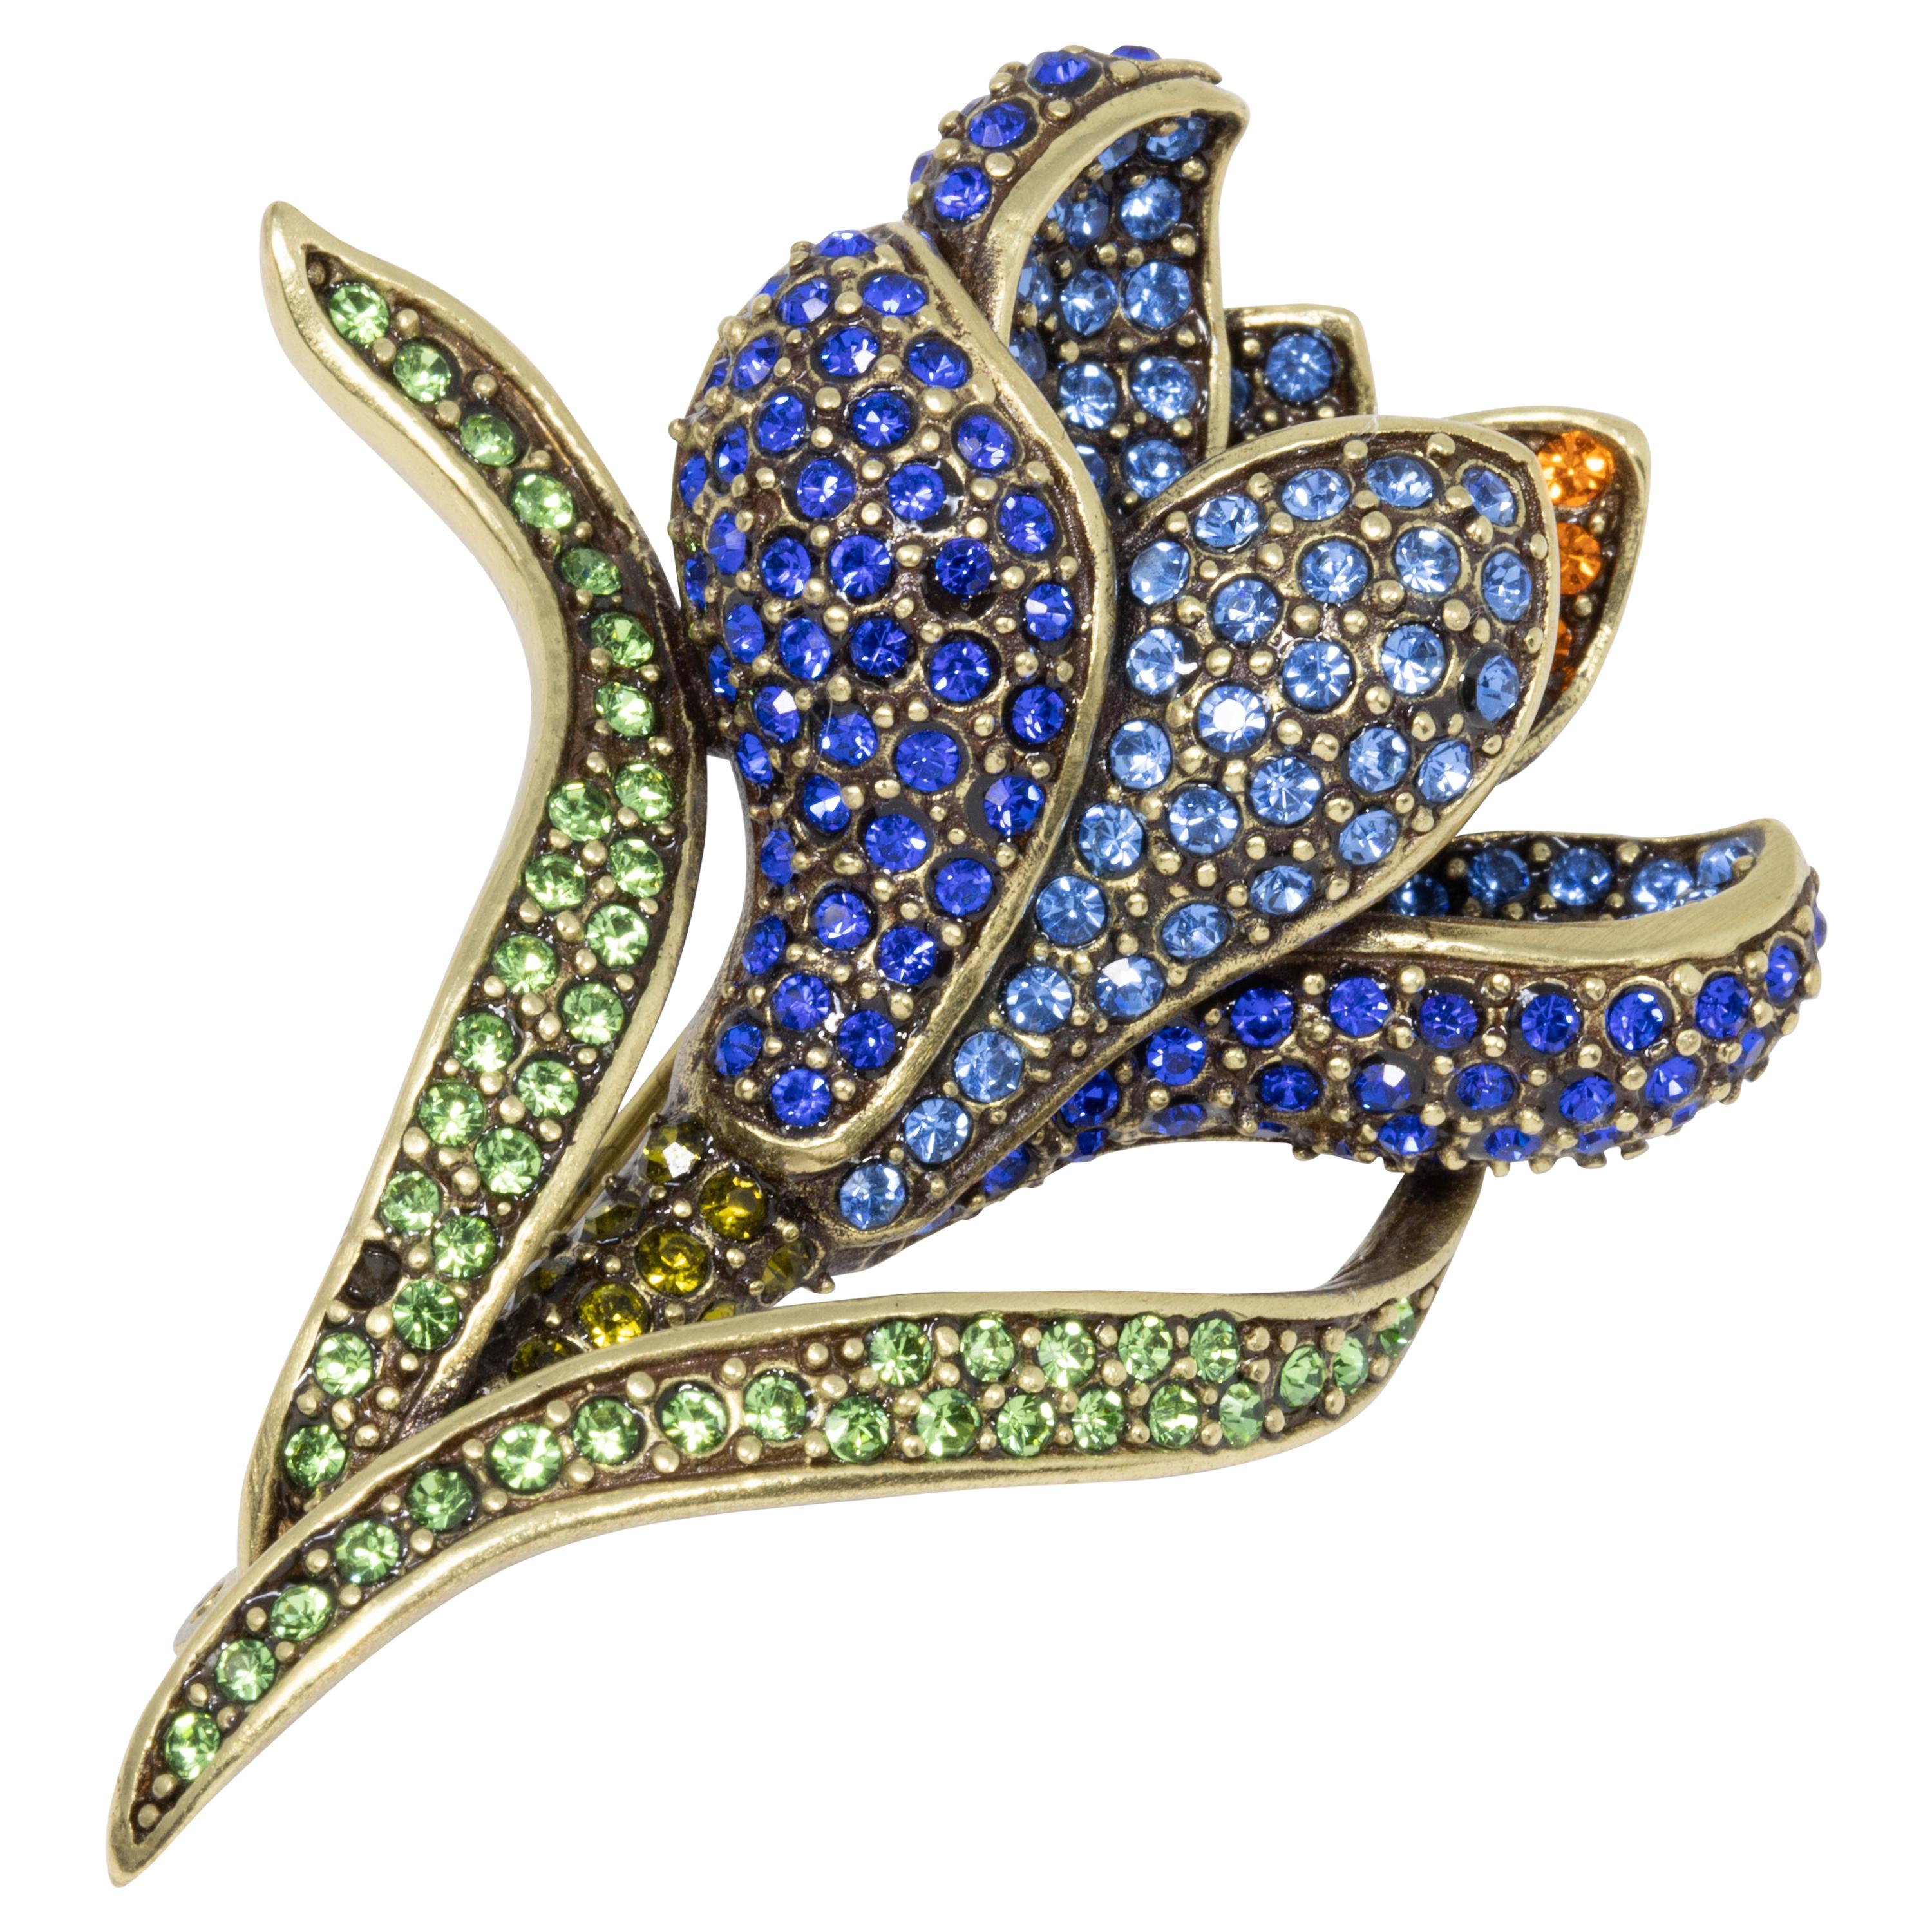 Heidi Daus Flowing Flower Pin Brooch, Pave Crystals and Antique Brass Tone